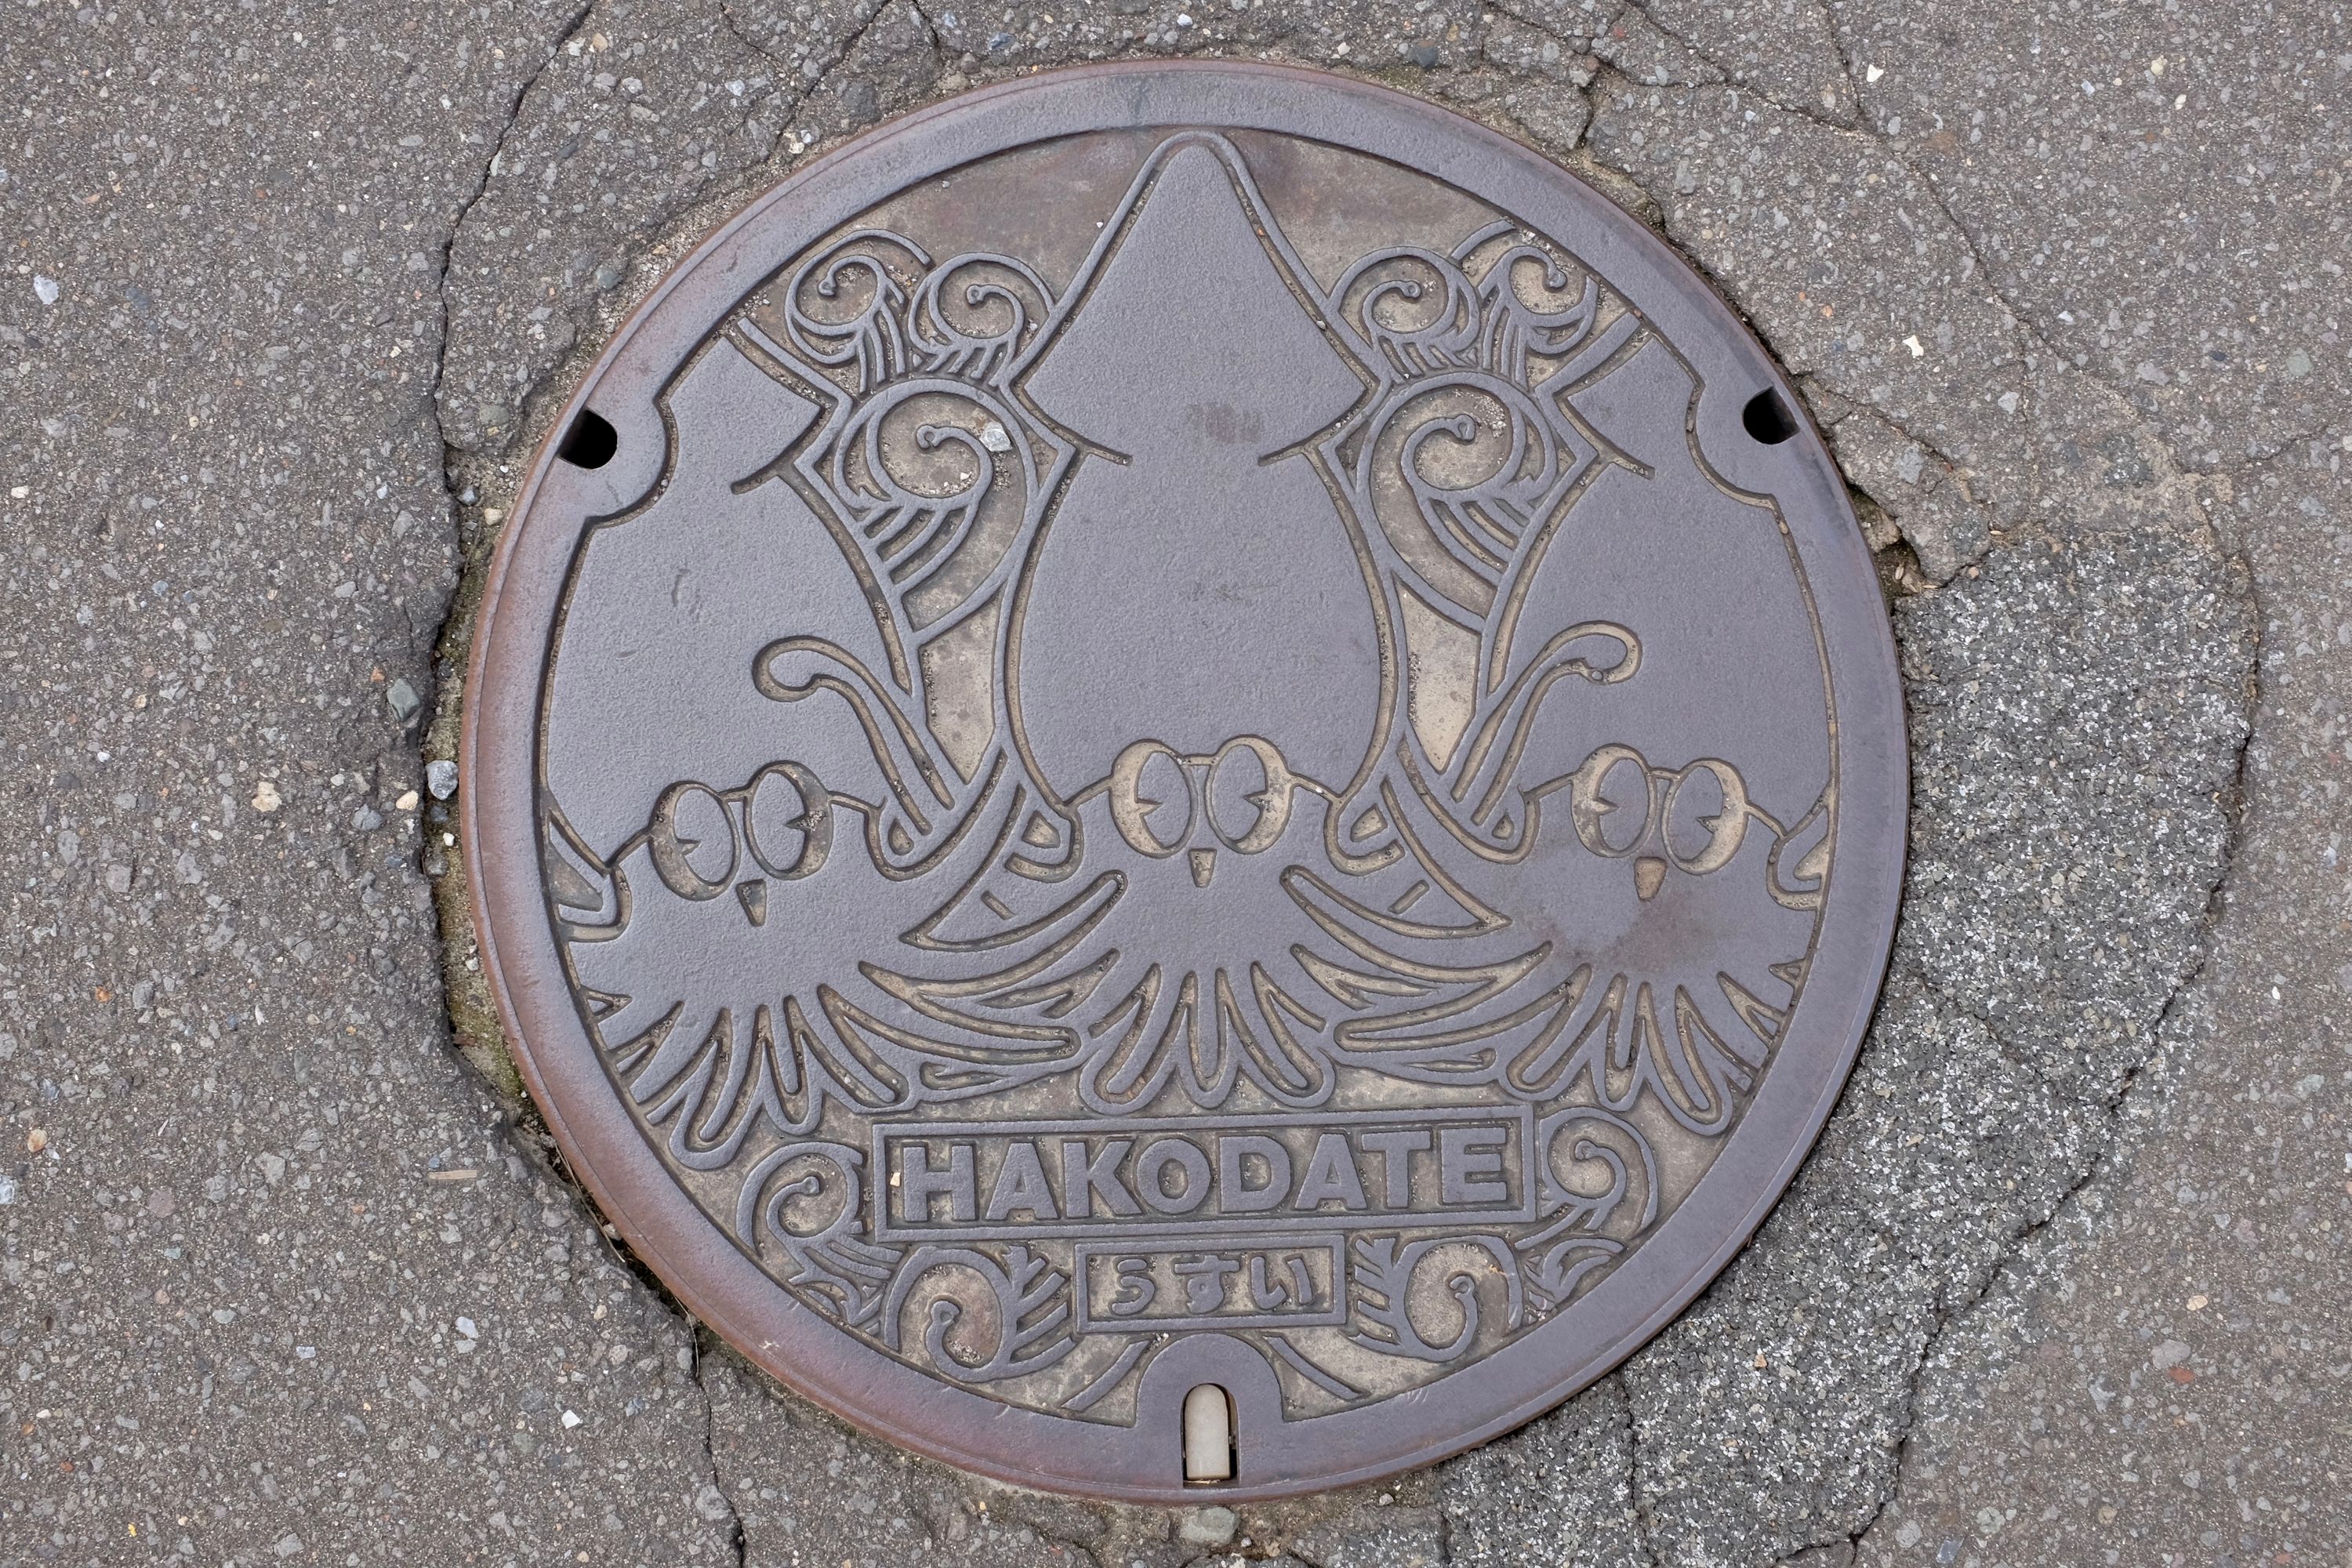 A manhole cover with three squids says Hakodate.